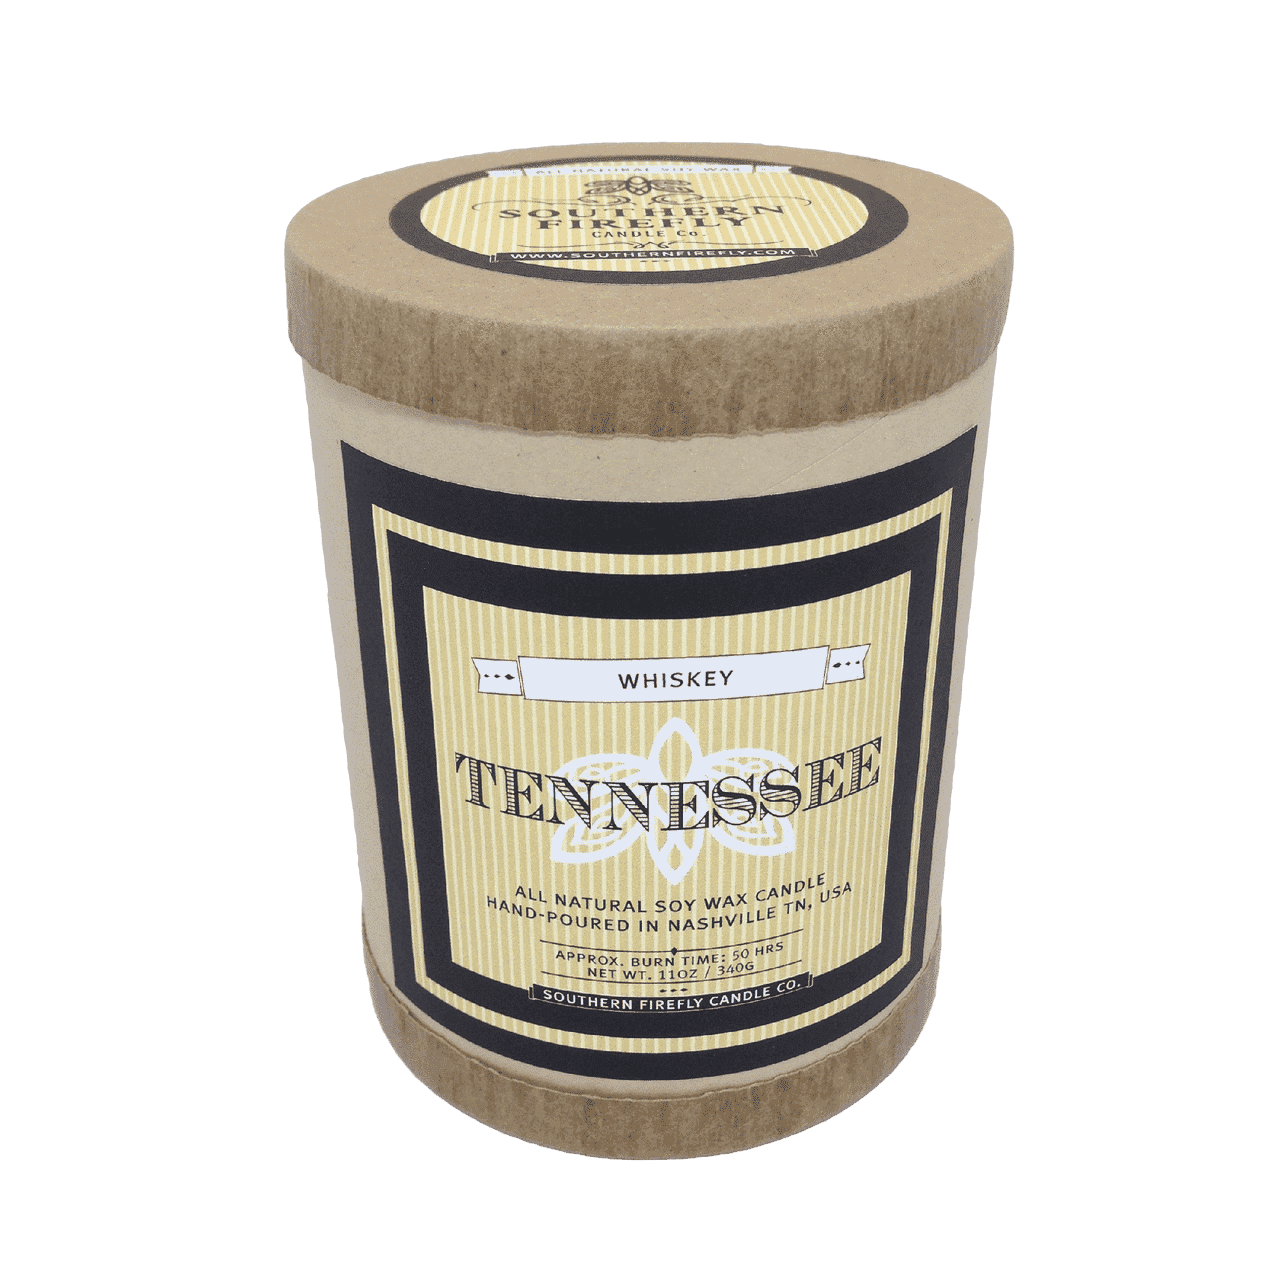 Tennessee Destination Series Soy Candle in Tennessee Whiskey Scent by Southern Firefly Candle Co. - Country Club Prep